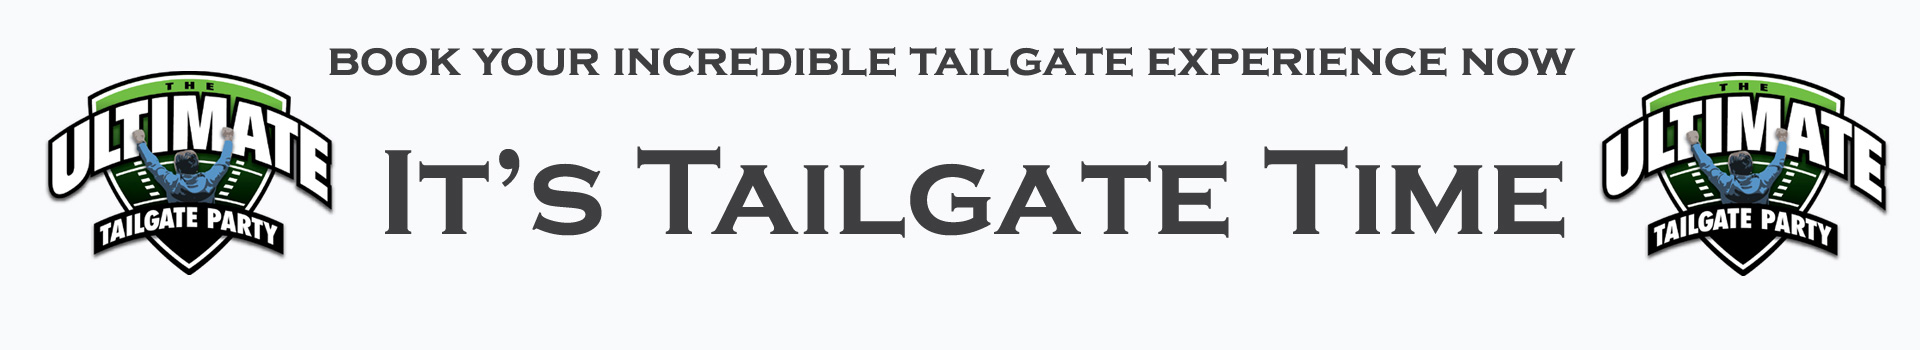 The Ultimate Tailgate Party